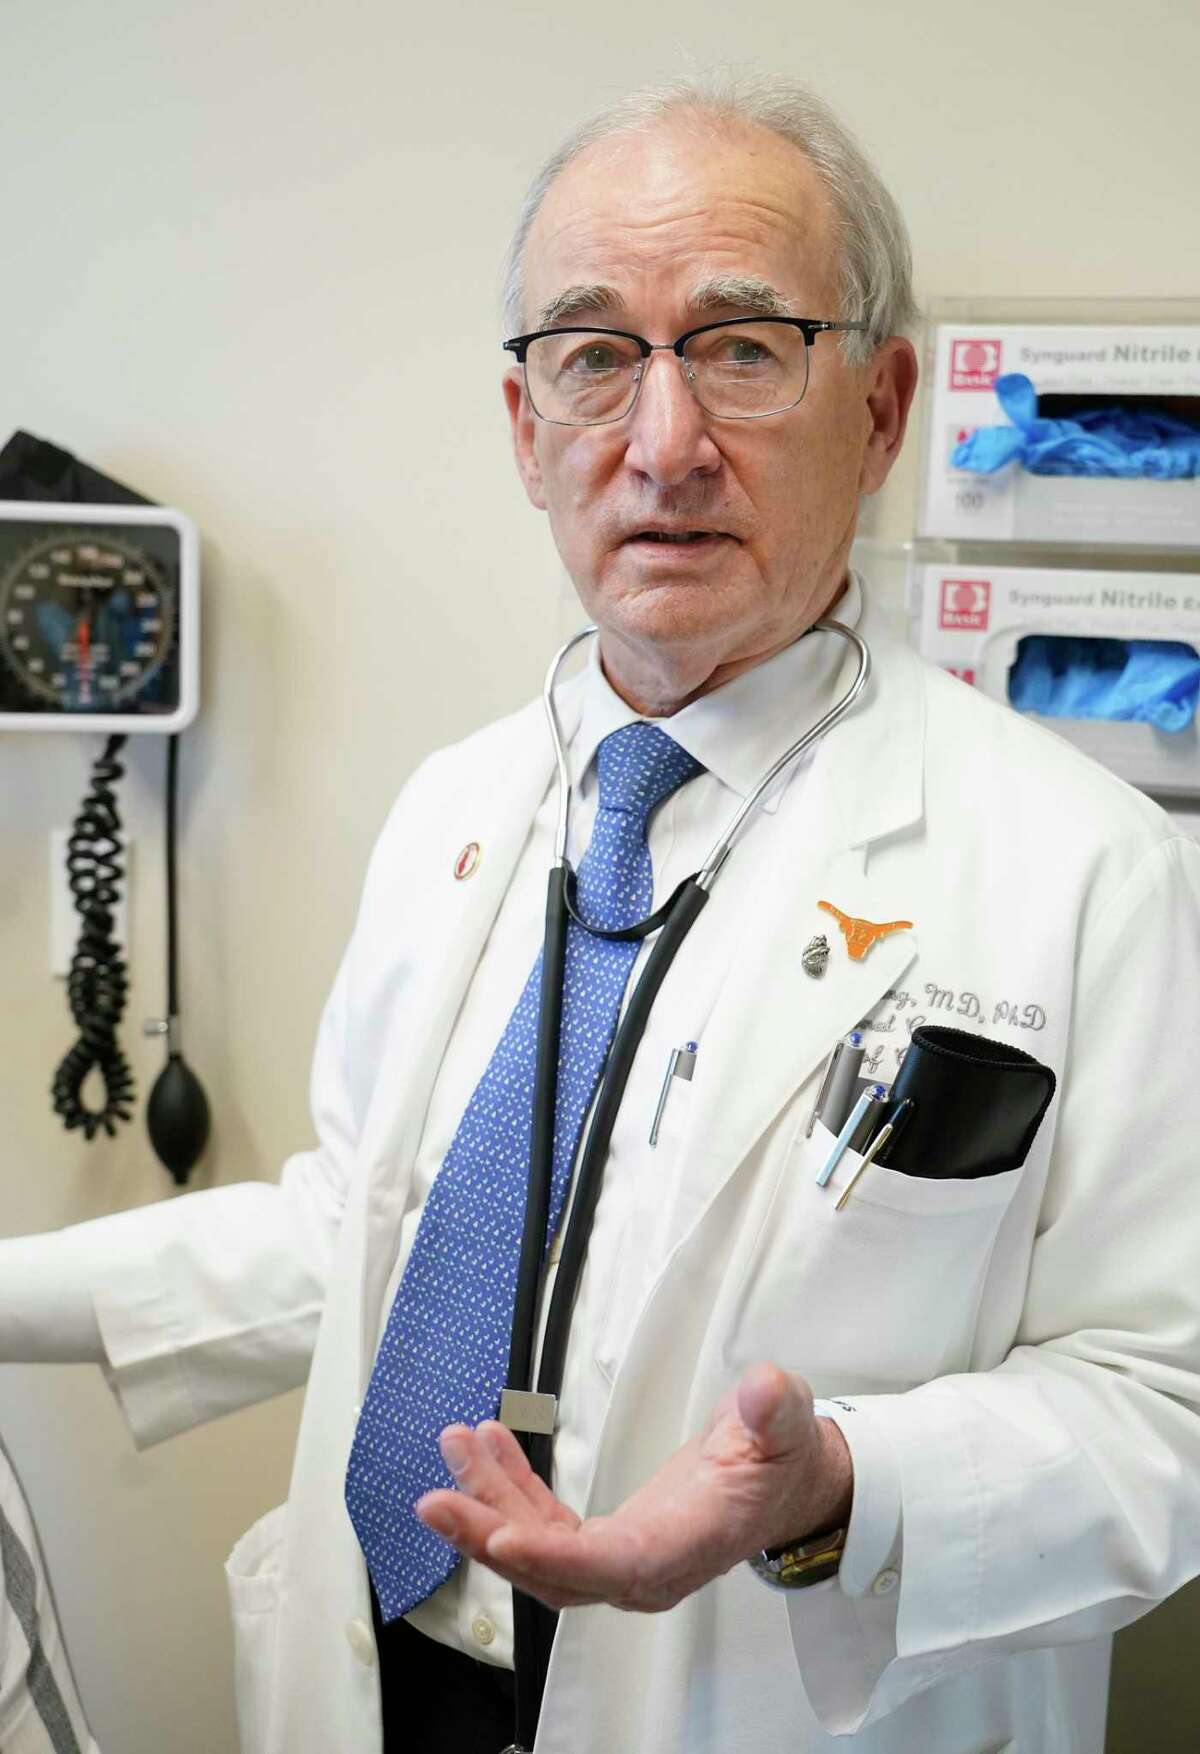 Dr. Richard Smalling, a cardiologist, talks about patient Janna Tarver at UT Physicians, 6410 Fannin St., Wednesday, March 23, 2022, in Houston.